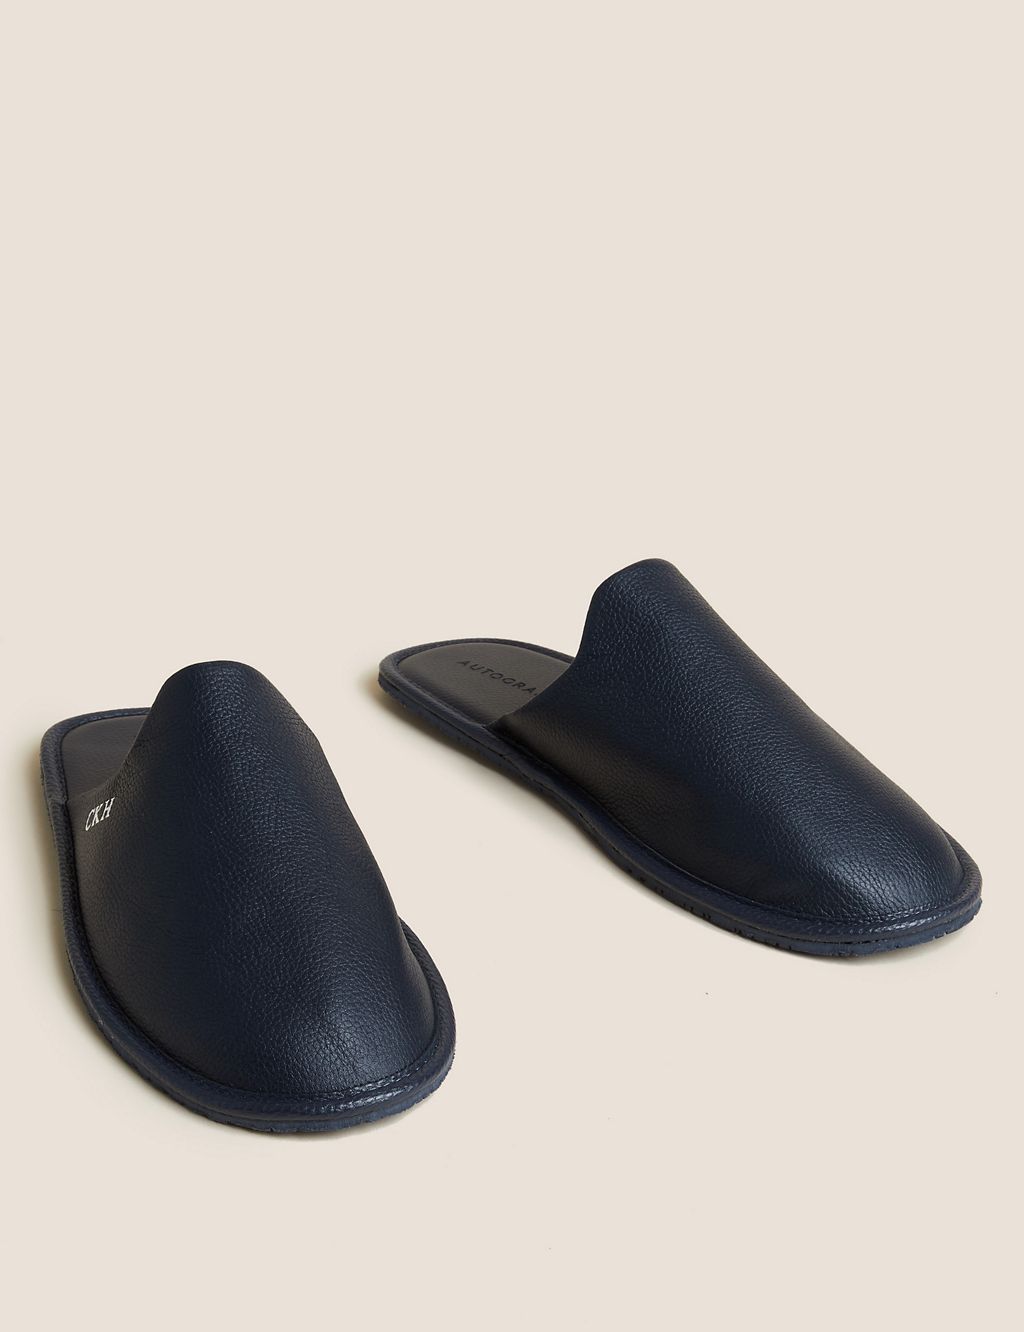 Personalised Men's Leather Mule Slippers | Autograph | M&S